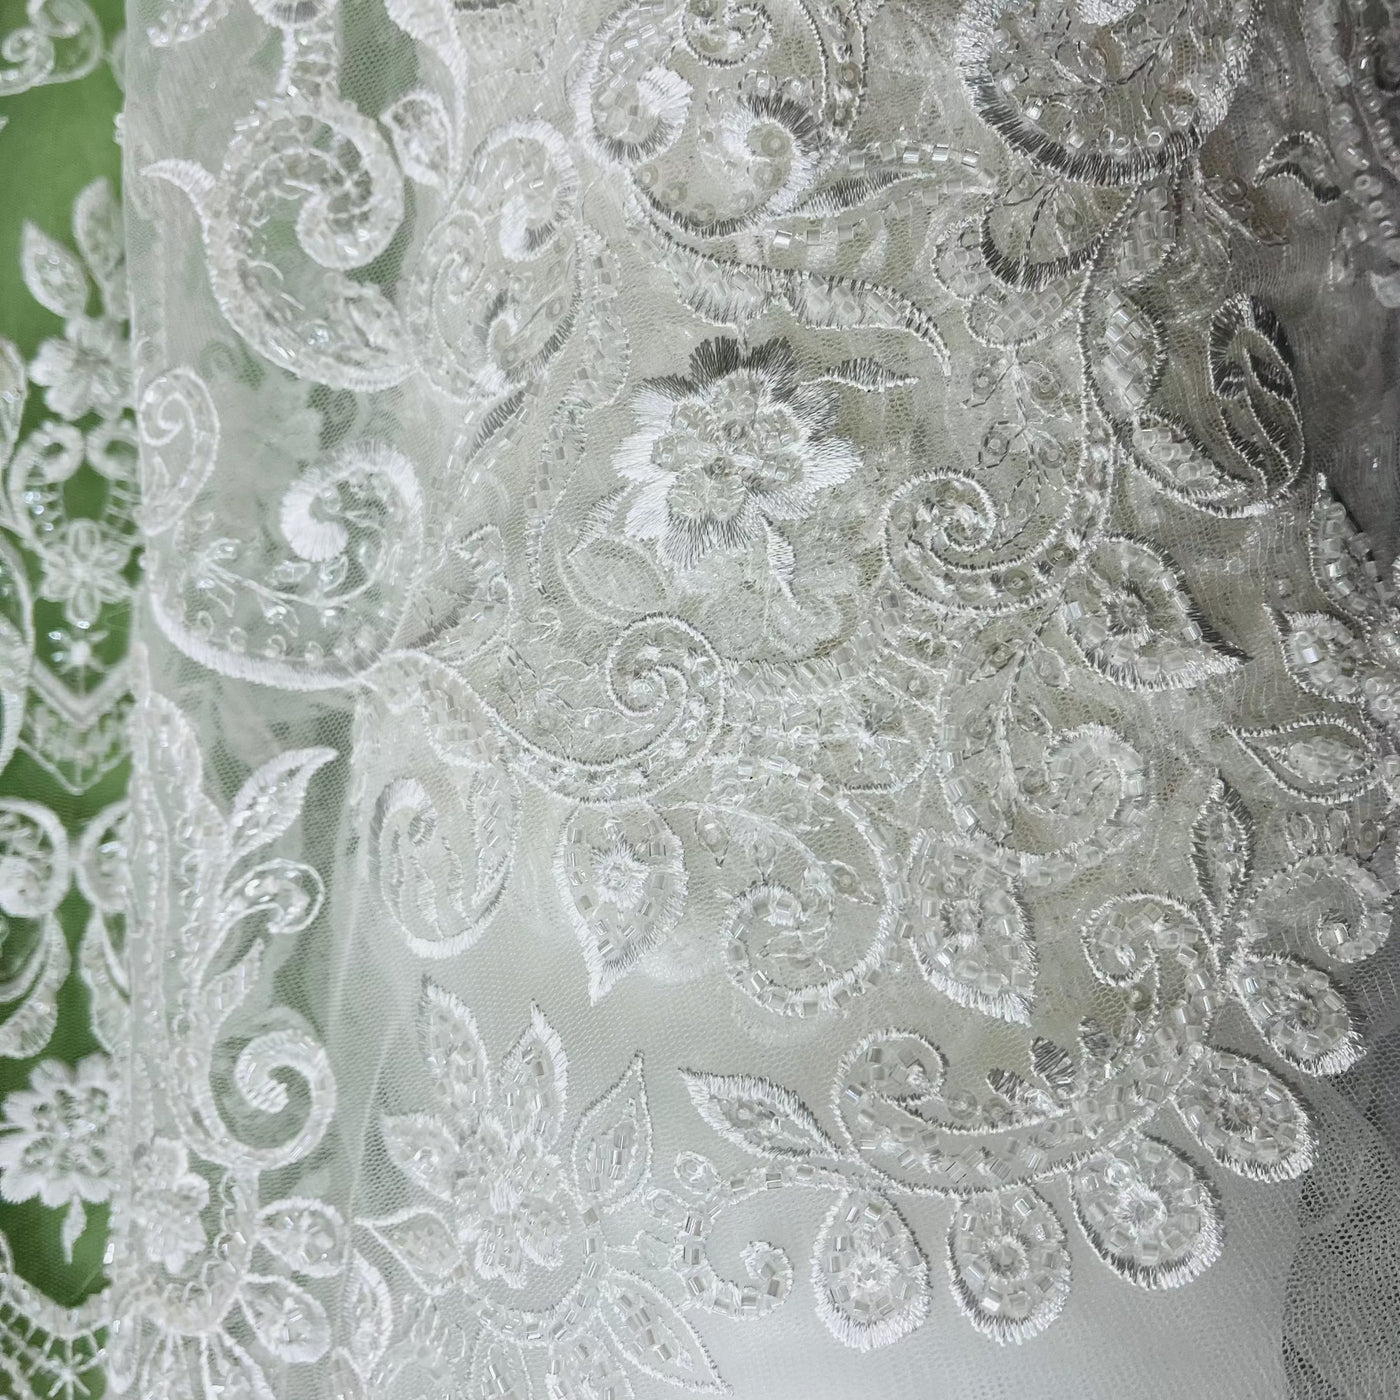 Beaded & Sequined Lace Fabric Embroidered on 100% Polyester Net Mesh | Lace USA - GD-12156 Ivory